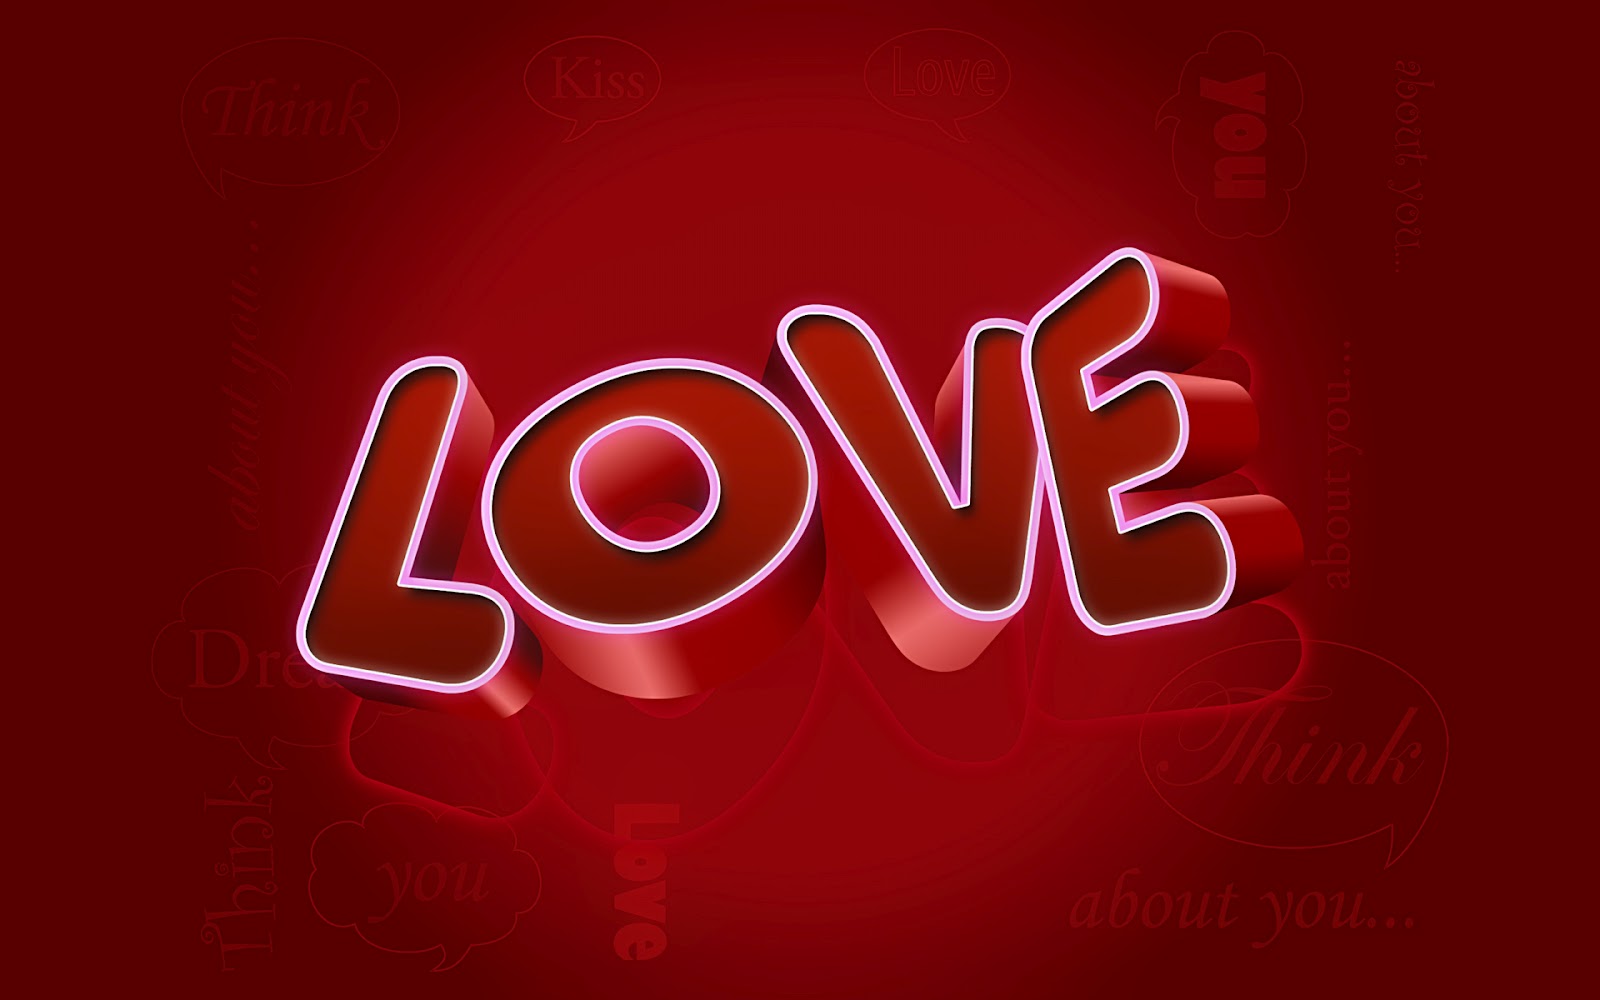 Wallpaper collection: I love you wallpaper